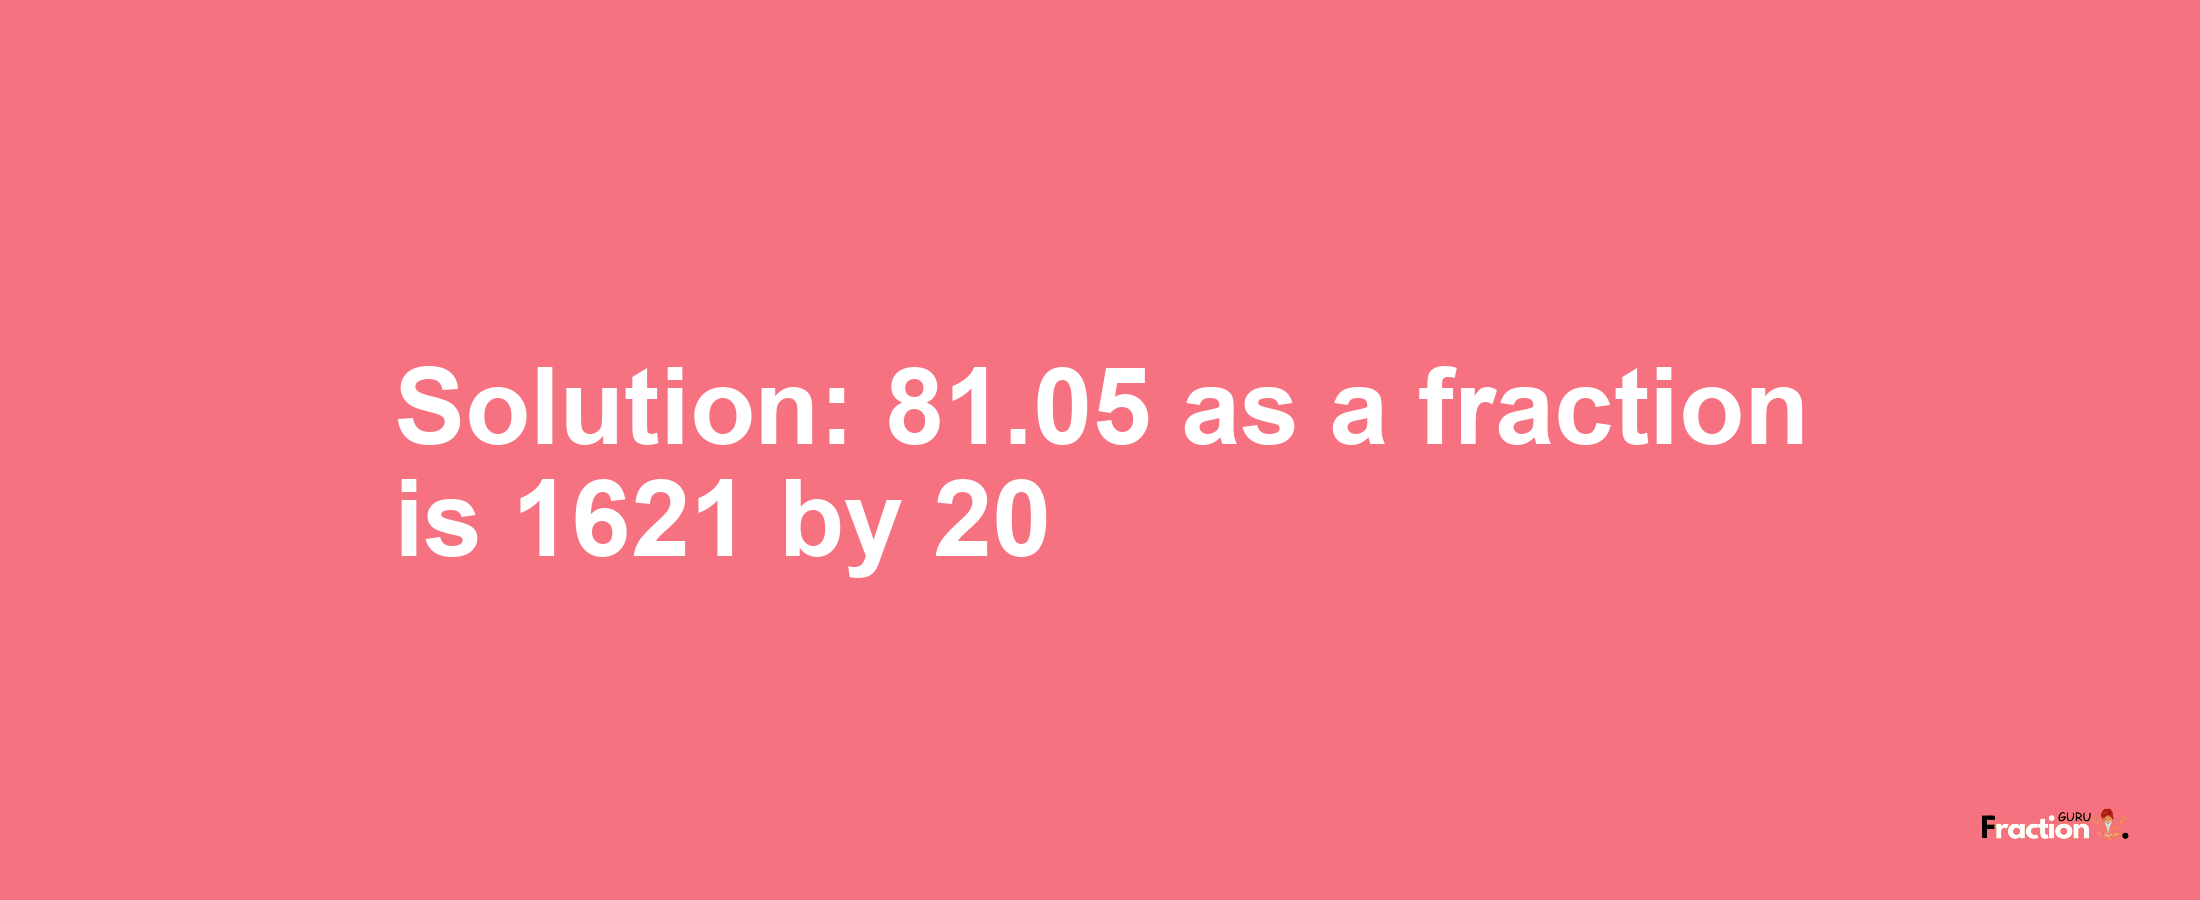 Solution:81.05 as a fraction is 1621/20